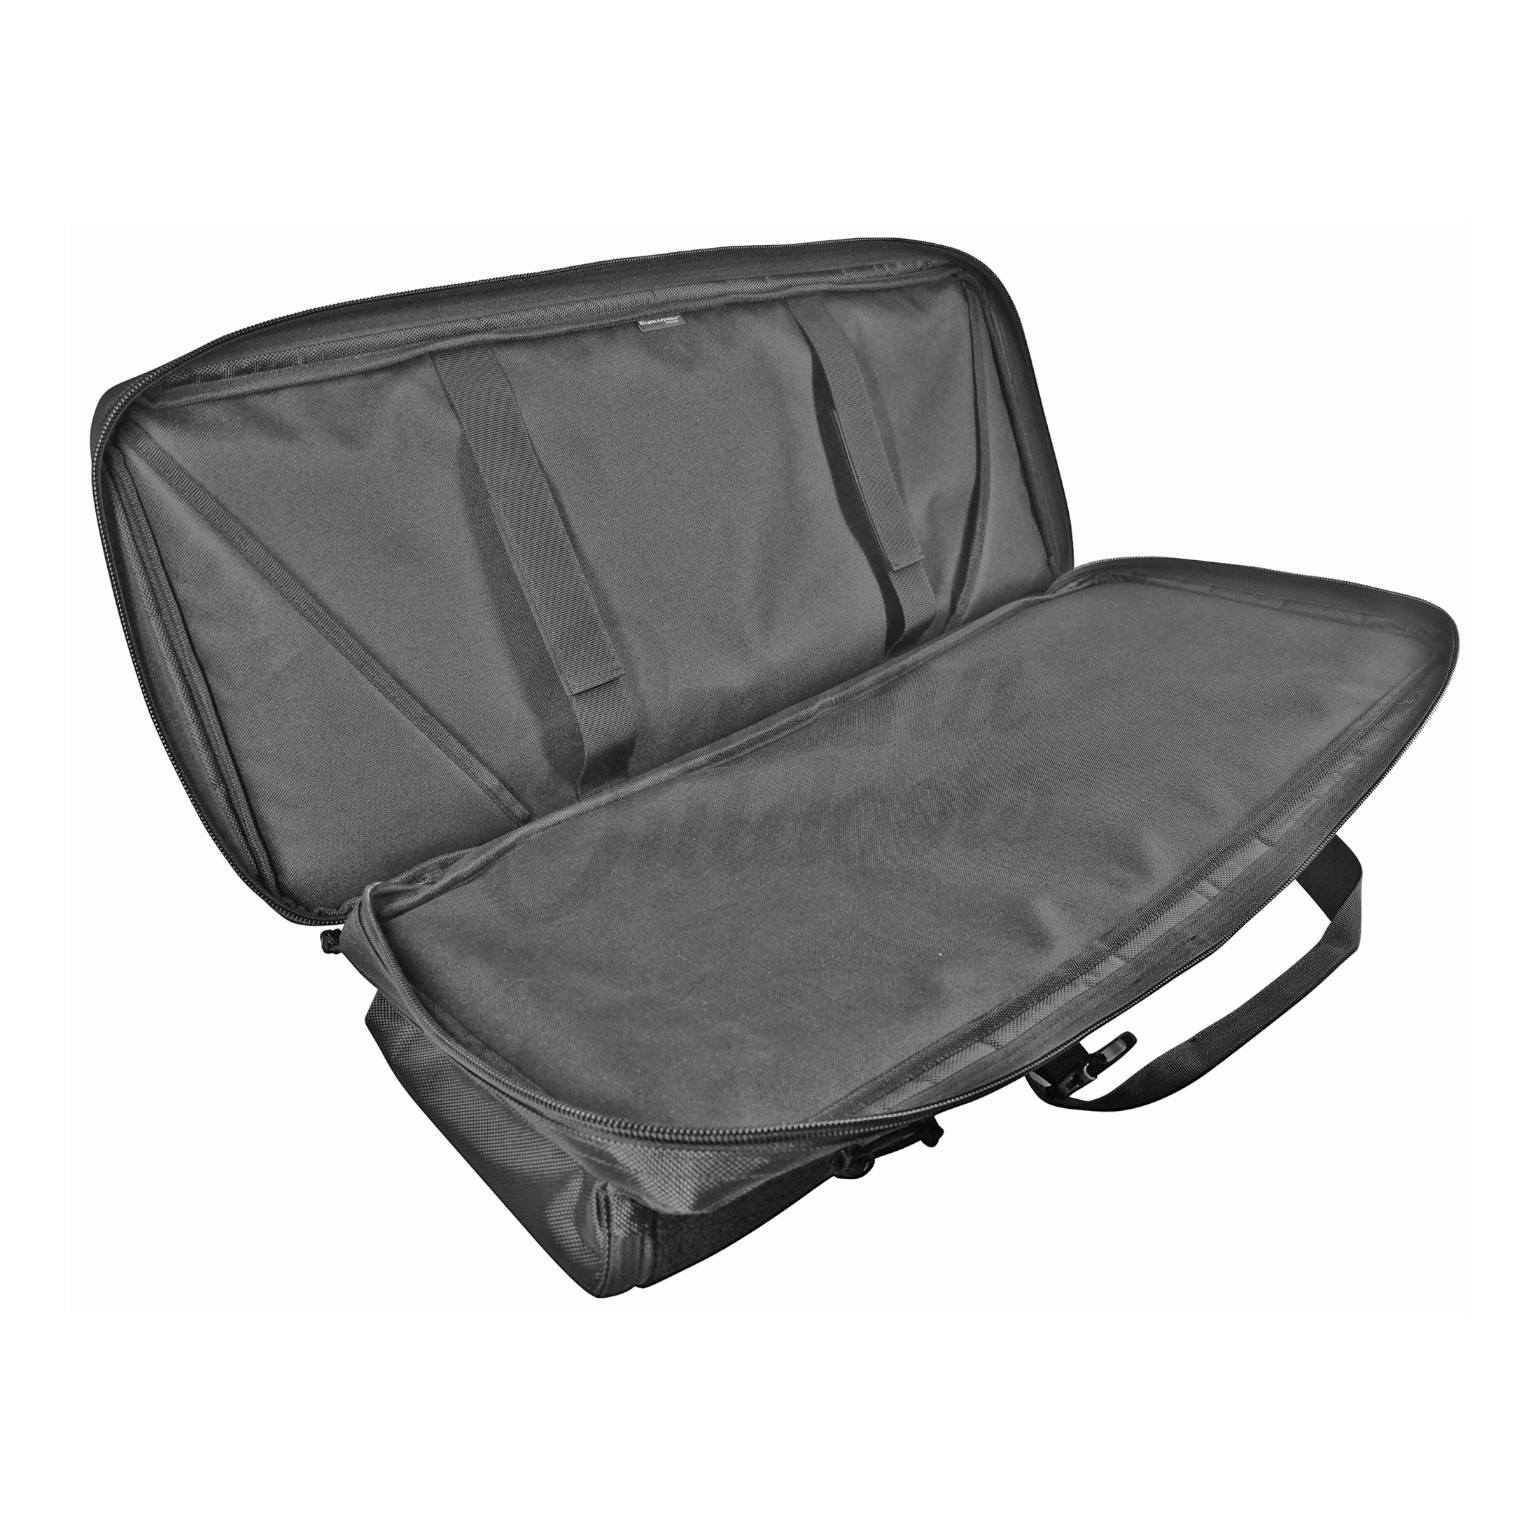 Evolution Outdoor 28-Inch Tactical Short Barreled Rifle Case - In Stock